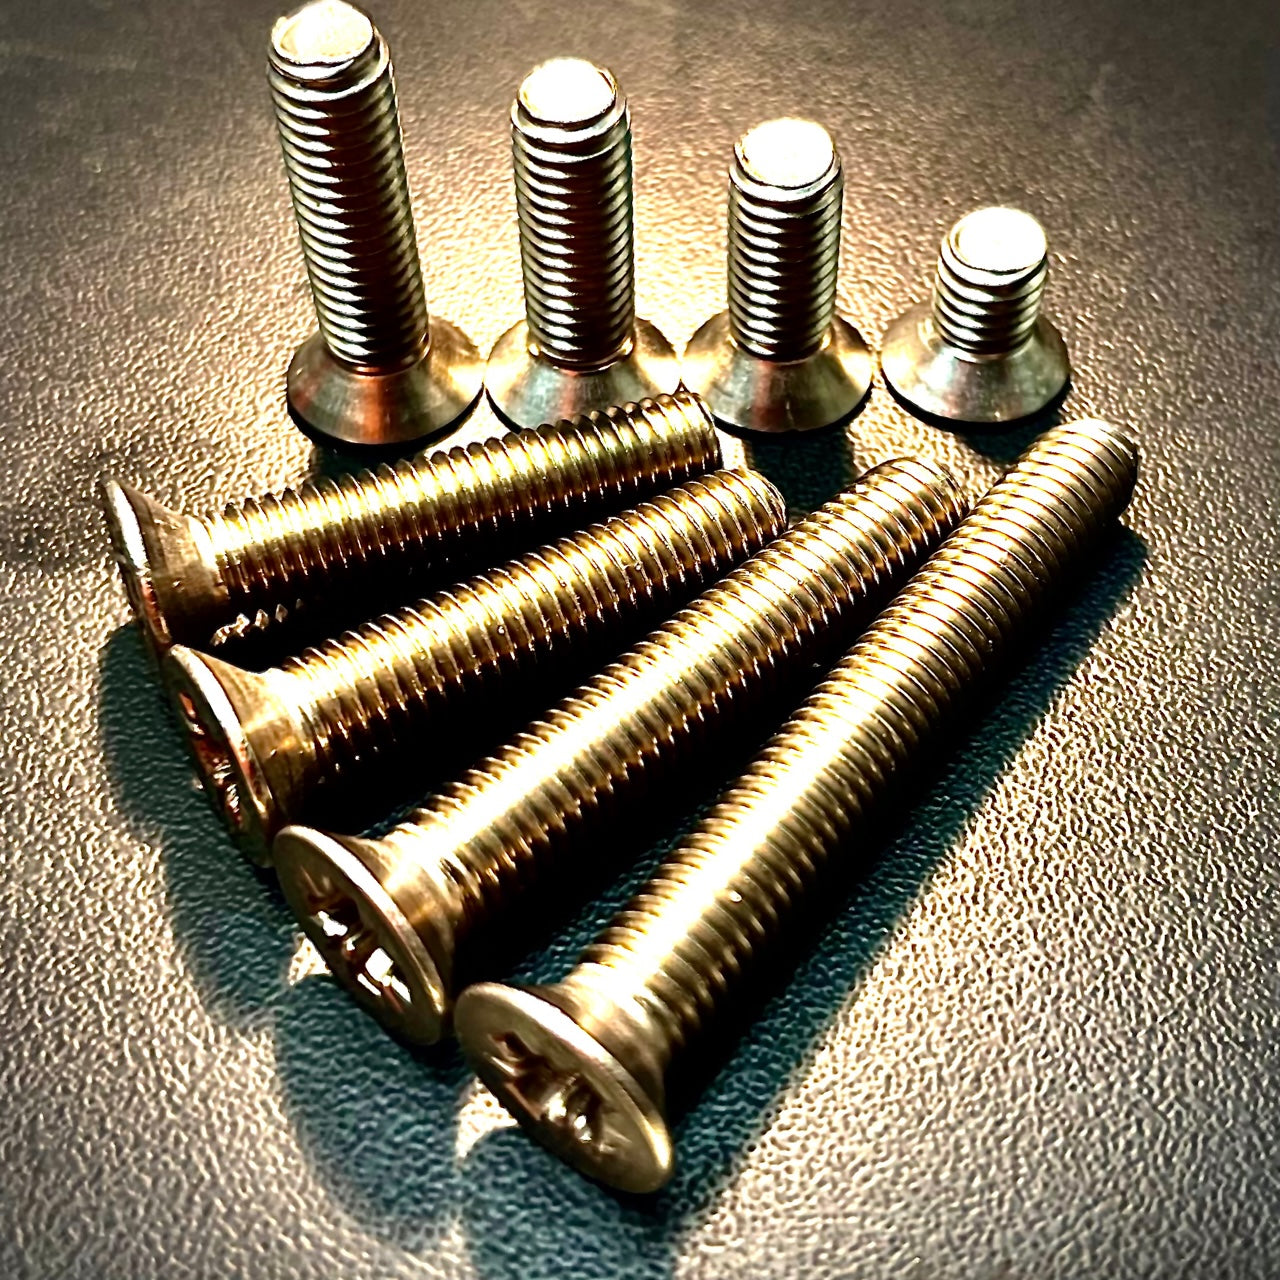 M5 x Under 45mm Machine Screws Pozi Countersunk A2/304 Stainless Steel - Fixaball Ltd. Fixings and Fasteners UK